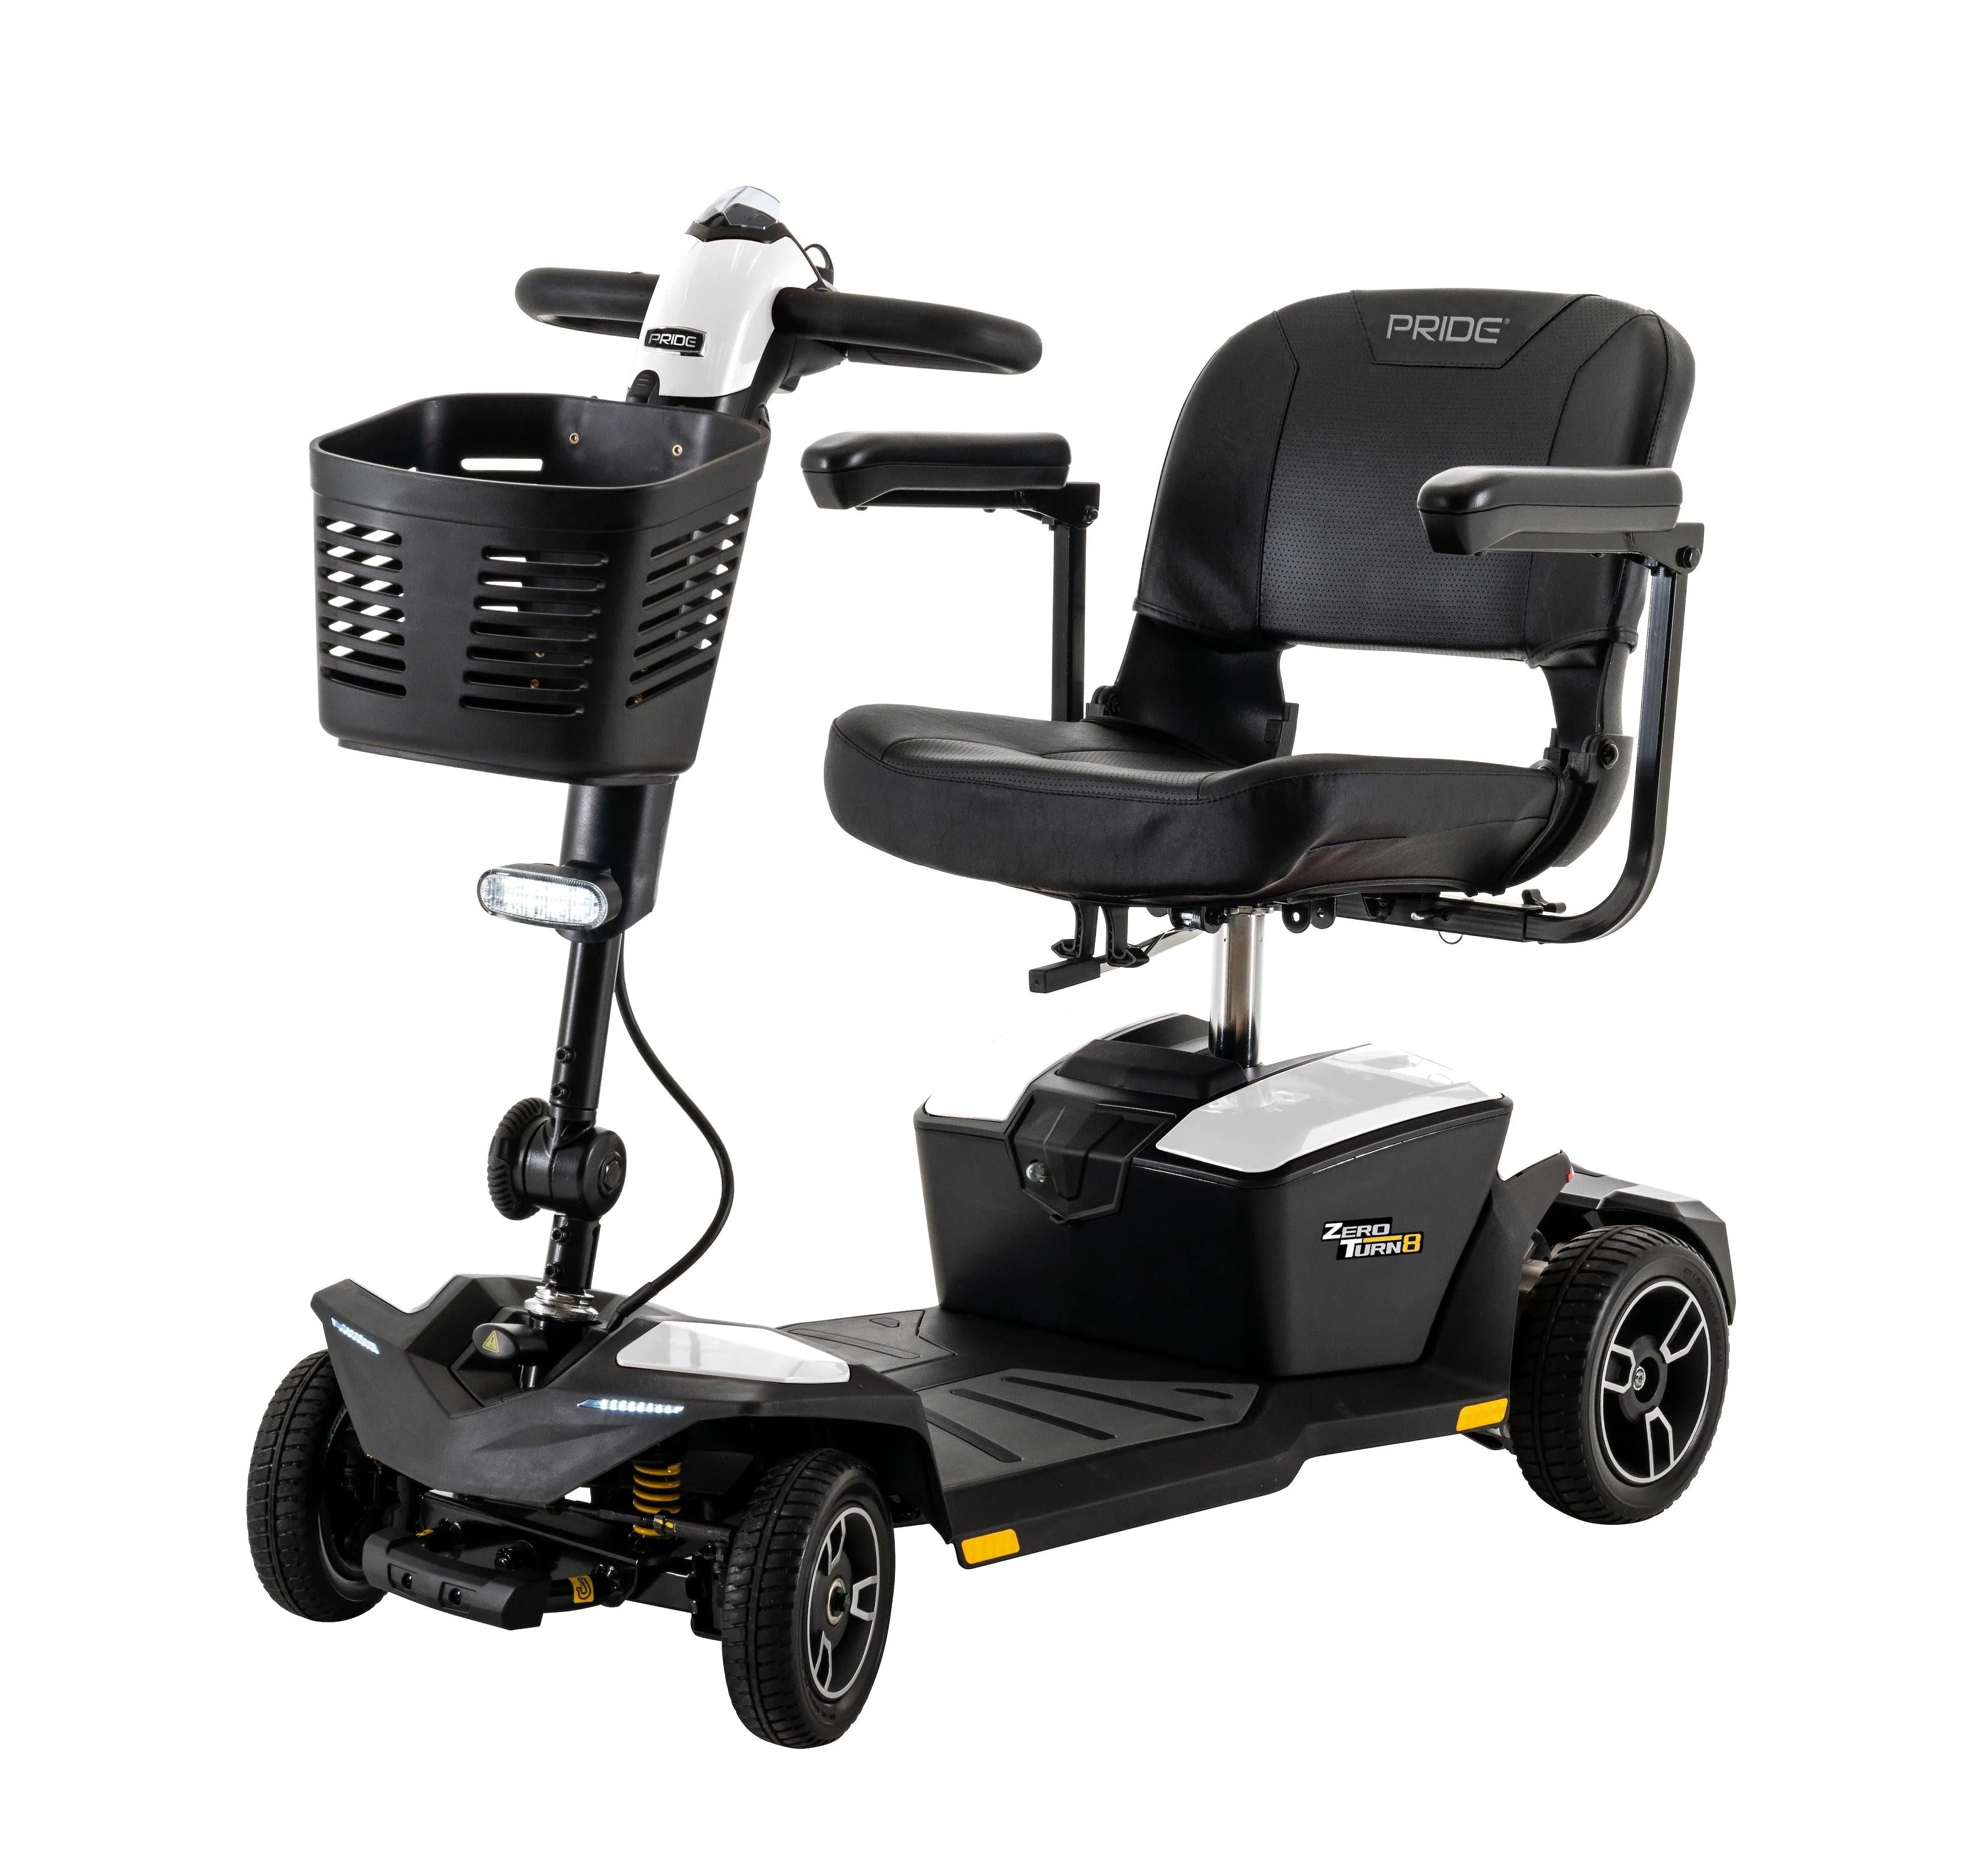 image of Pride Mobility Jazzy Zero Turn 8 Mobility Scooter with basket attached